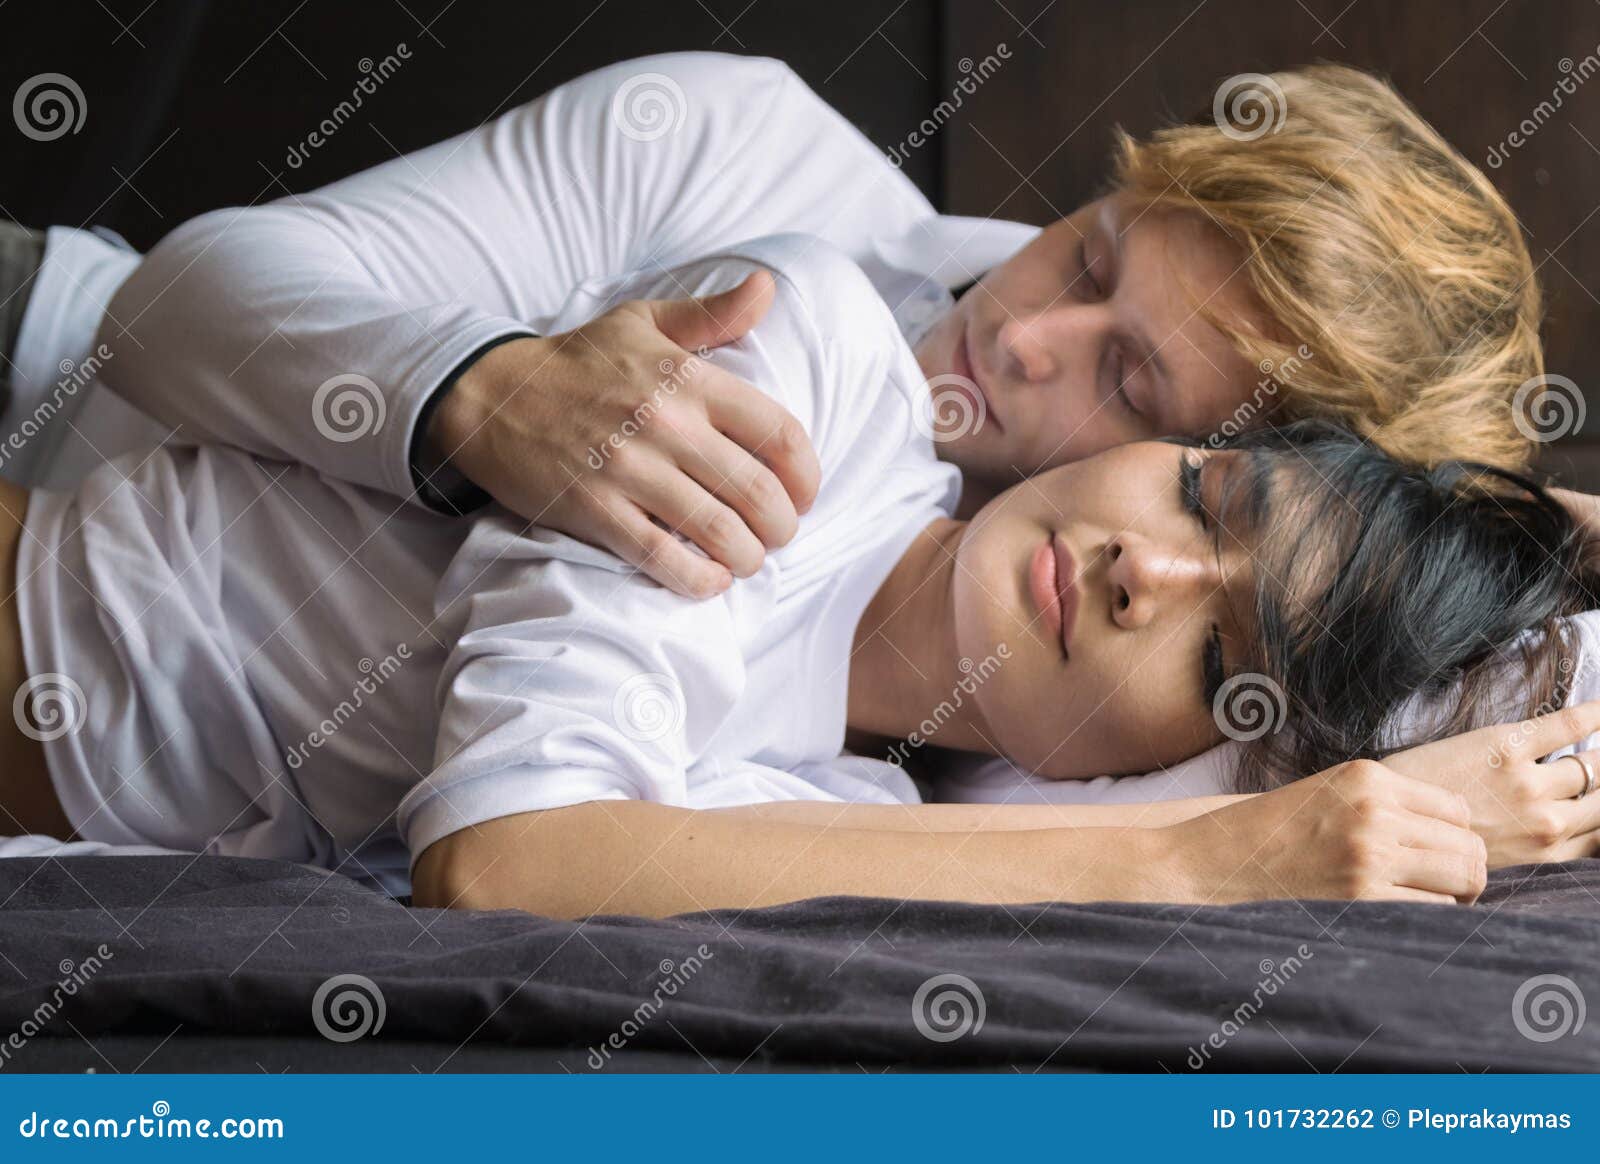 Loving Couple Hug Each Other on the Bedroom,Romantic Couple in L ...